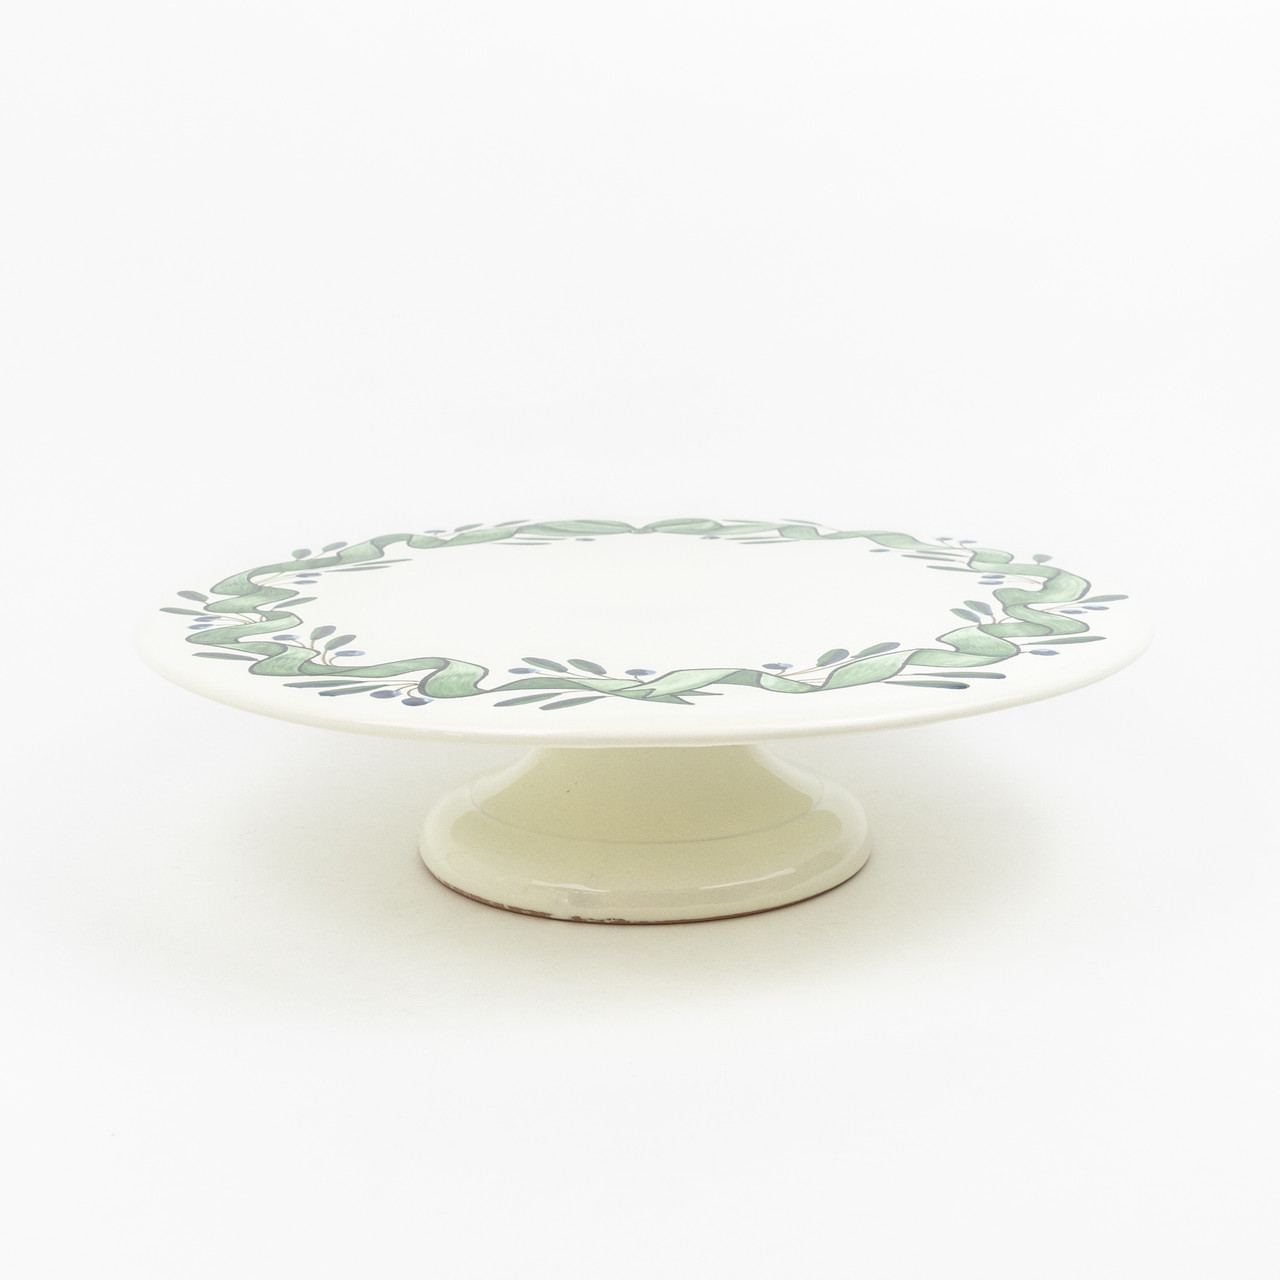 Olive & Ribbon Cake Stand